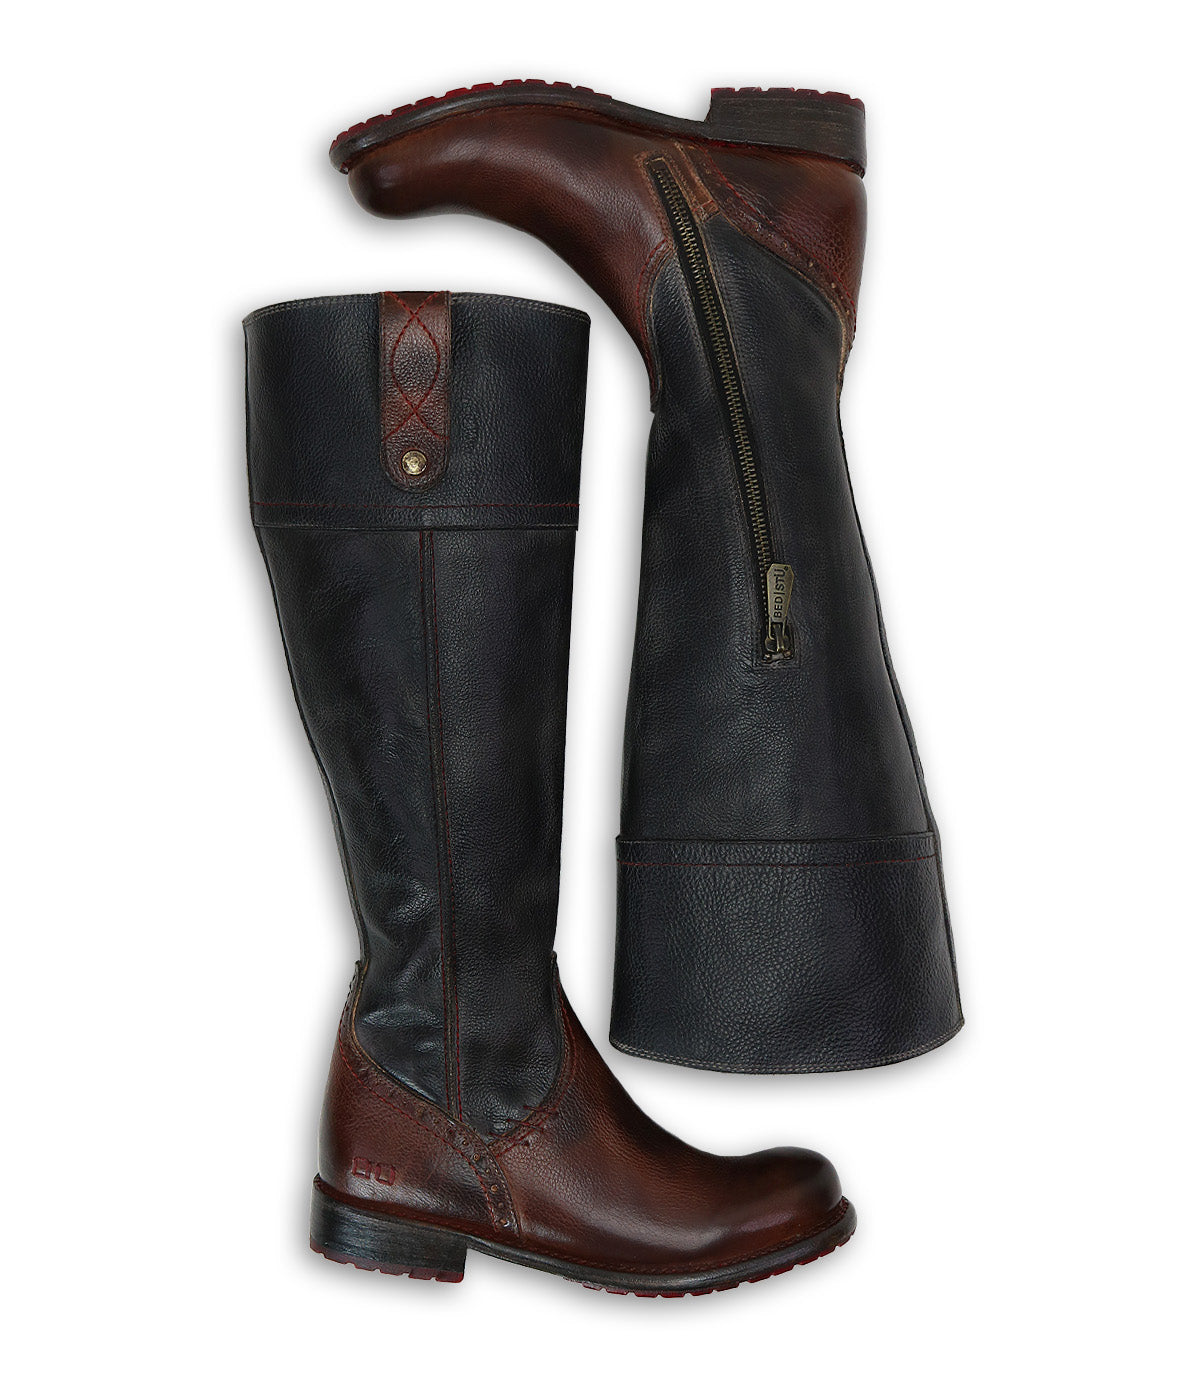 A pair of Bed Stu Jacqueline Wide Calf riding boots in brown and black.